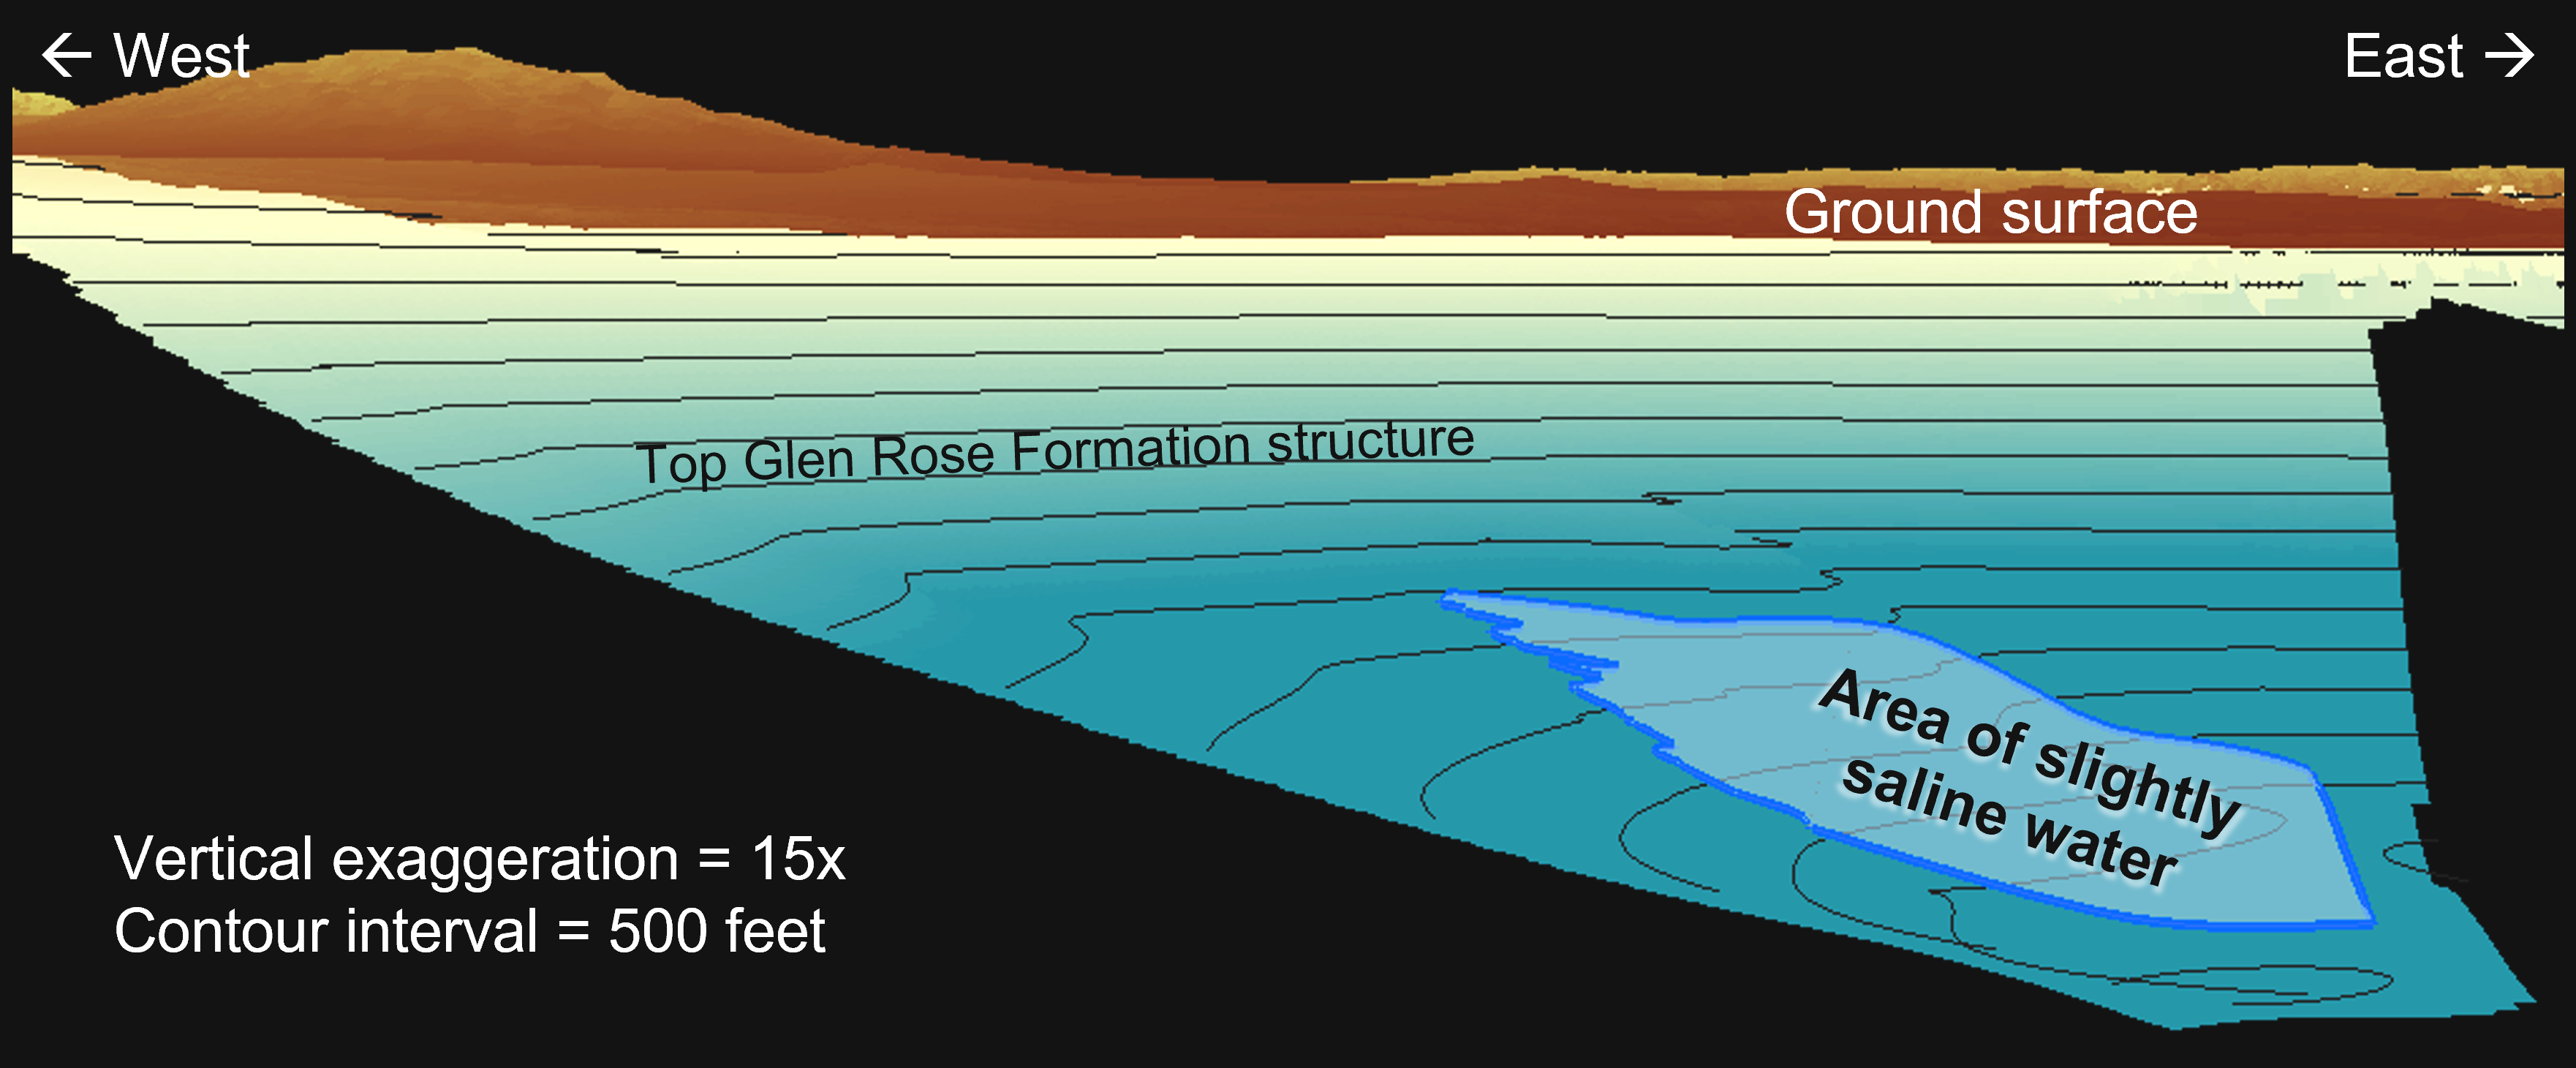 Pseudo cross section of the top of the Glen Rose Formation in the Maverick Basin mapped by the TWDB BRACS department. The view is to the north with west to the left and east to the right. The figure includes Mexico showing the top of Glen Rose Formation rising until it reaches the surface in the Sierra del Burro Mountains west of Maverick County. The deepest portion of the Glen Rose is to the east. 